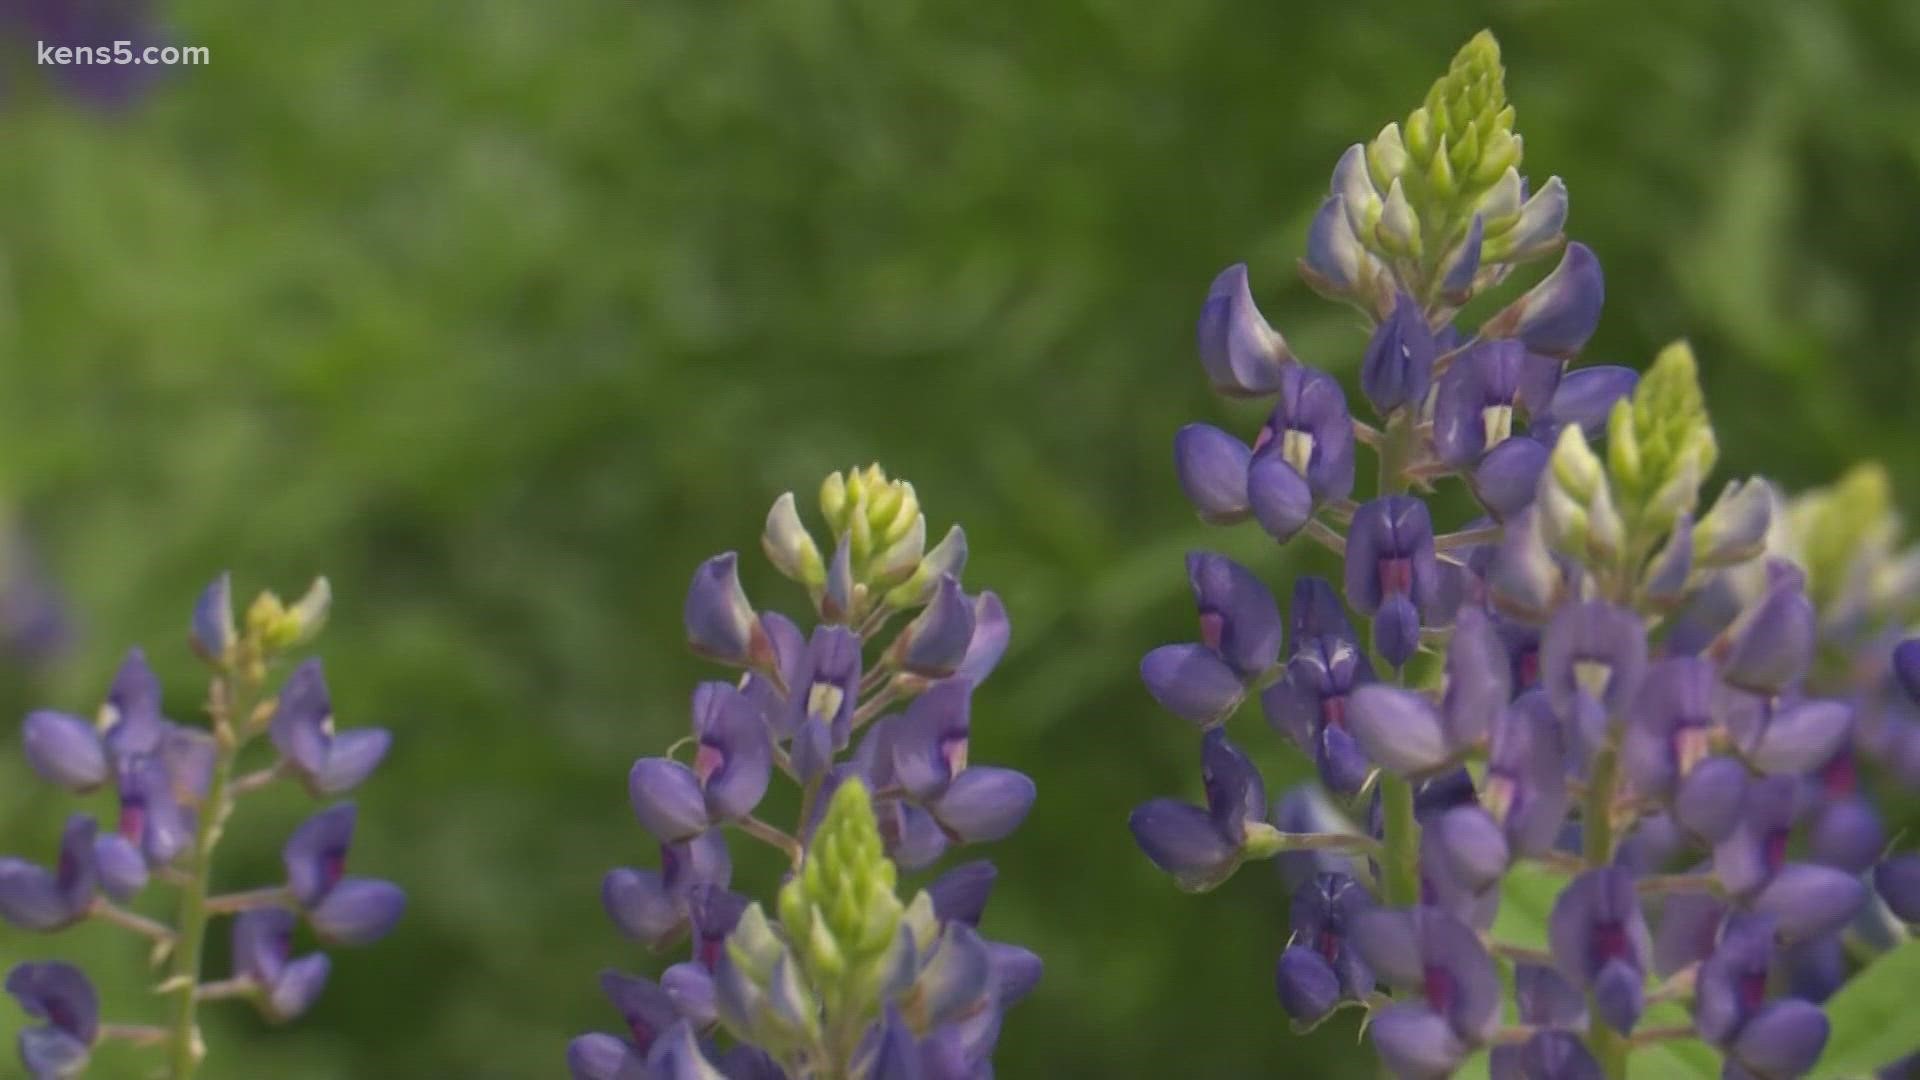 "Ireland has the shamrock, Japan has cherry-blossoms, and you know, Texas has blue bonnets."